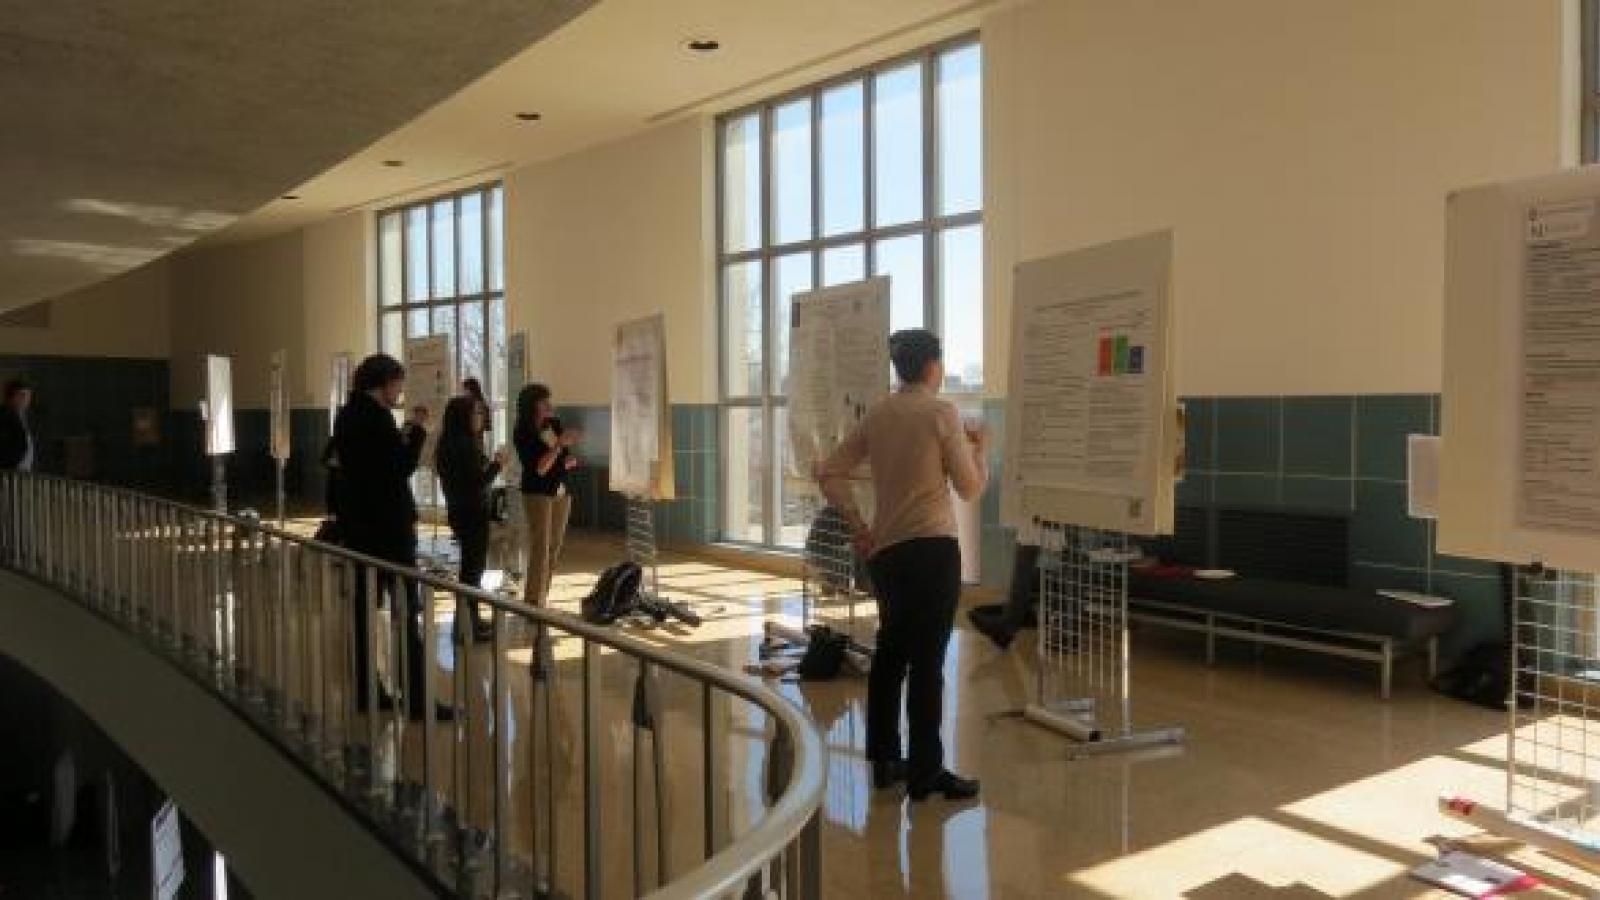 Poster session in Mershon lobby